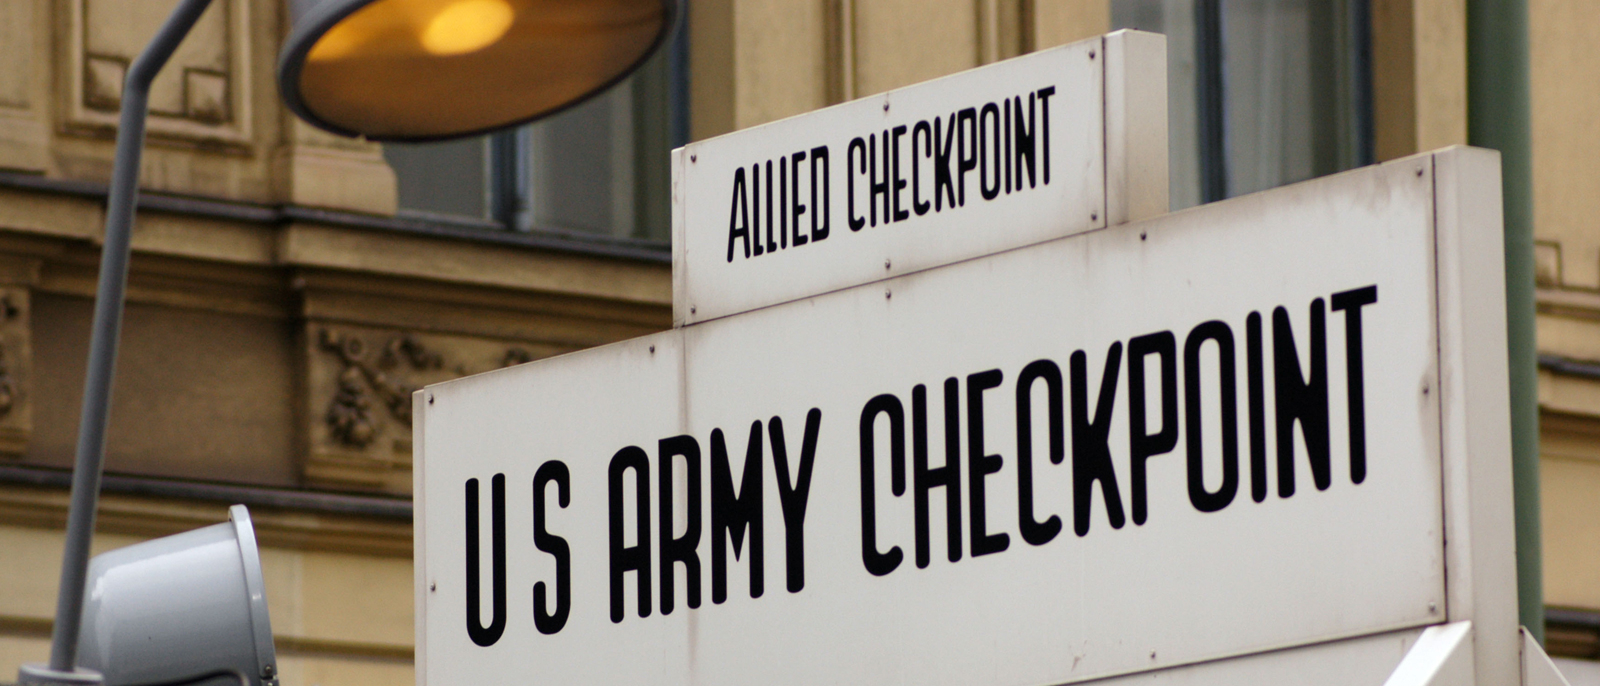 The words "Allied Checkpoint - US Army Checkpoint" on the reconstructed control booth.The words "Allied Checkpoint - US Army Checkpoint" on the reconstructed control booth.